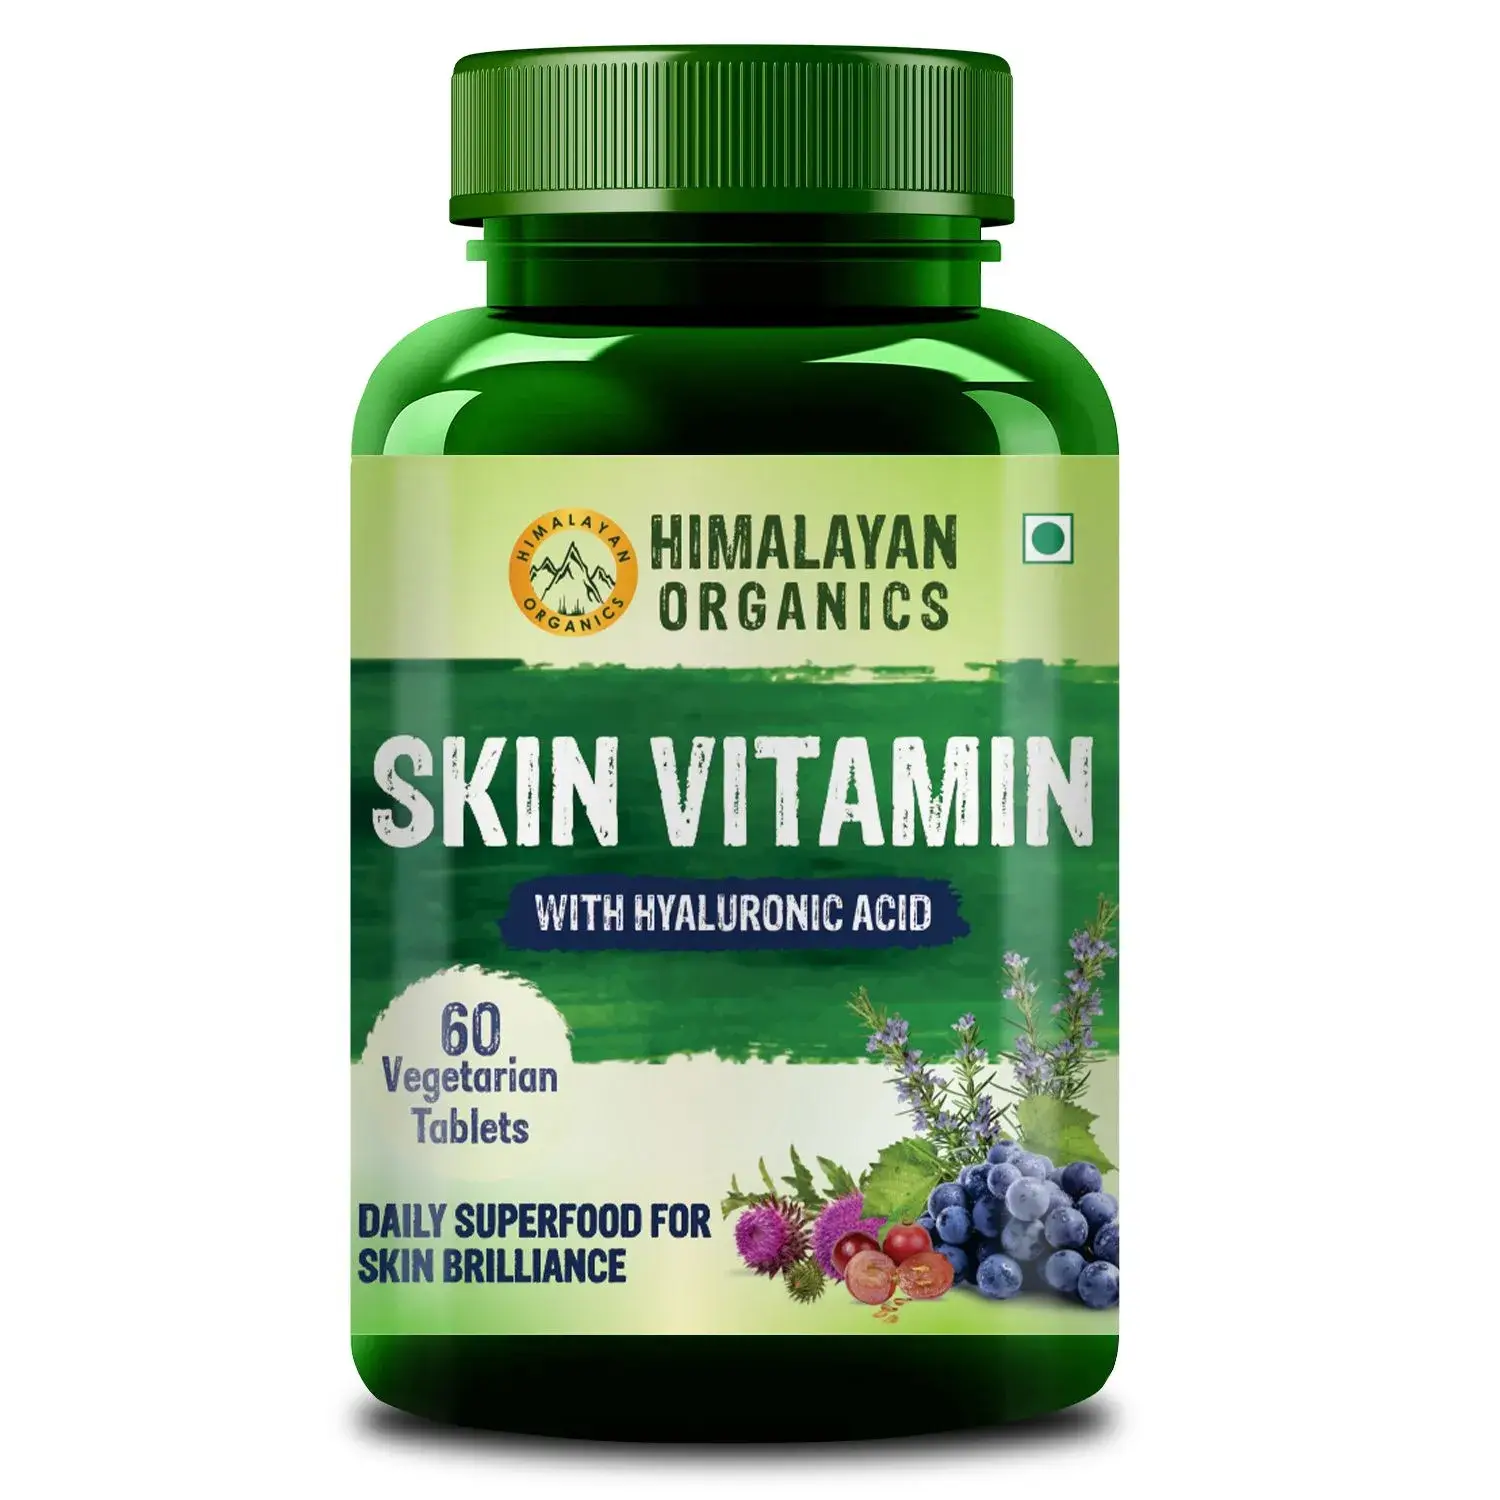 Himalayan Organics Skin Vitamin with Hyaluronic Acid, Grape Seed Extract & Silybum Extract for Skin Glow & Hydration – 60 Veg Tablets